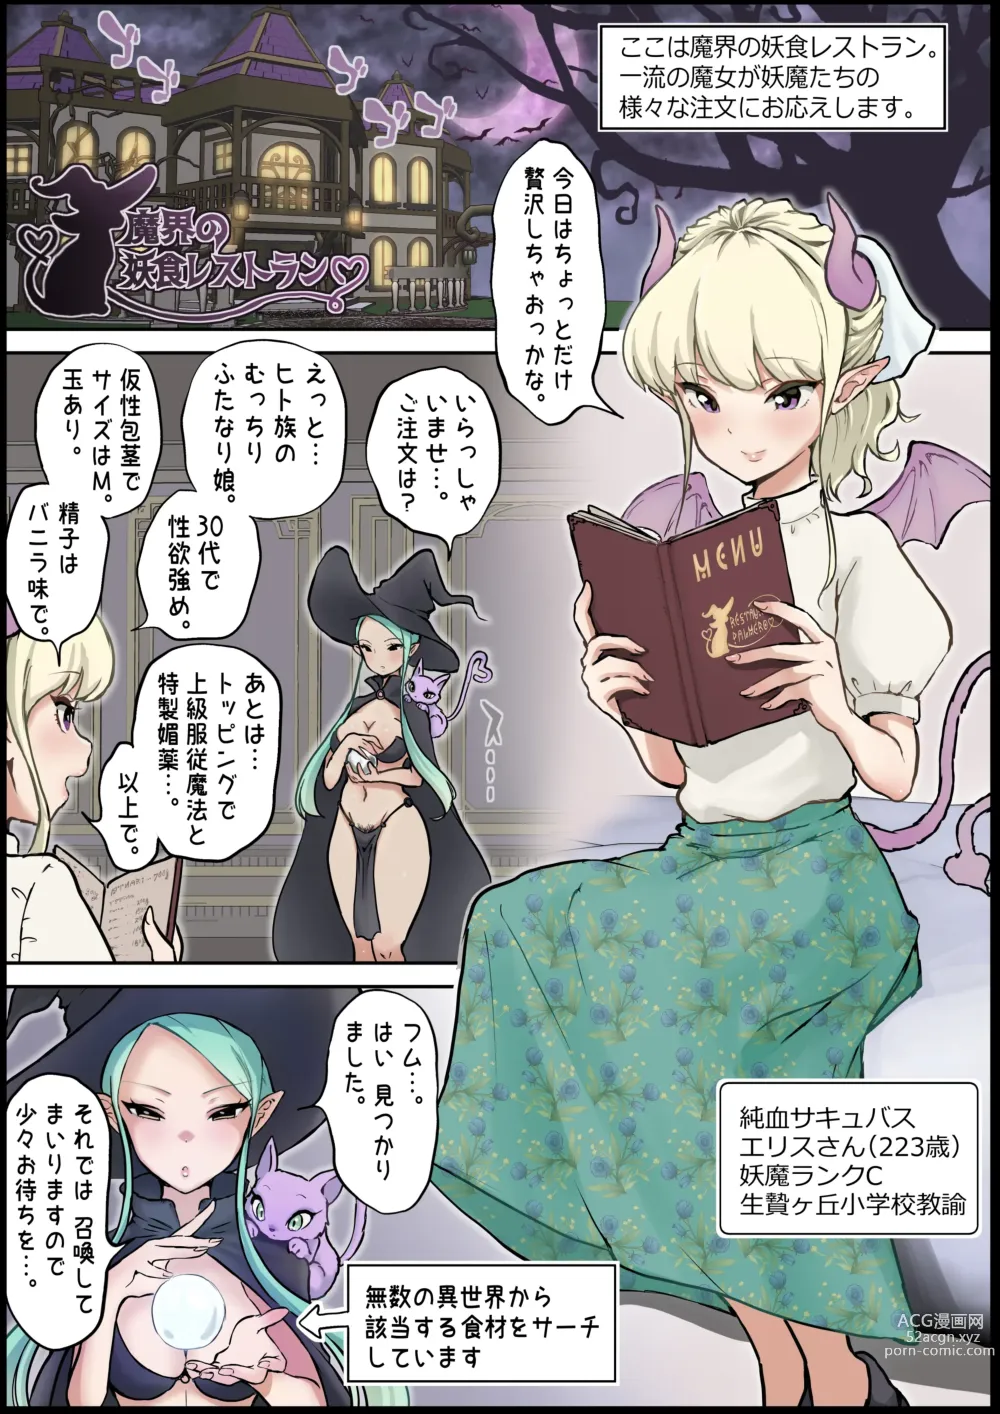 Page 2 of doujinshi Demonic Witch Restaurant